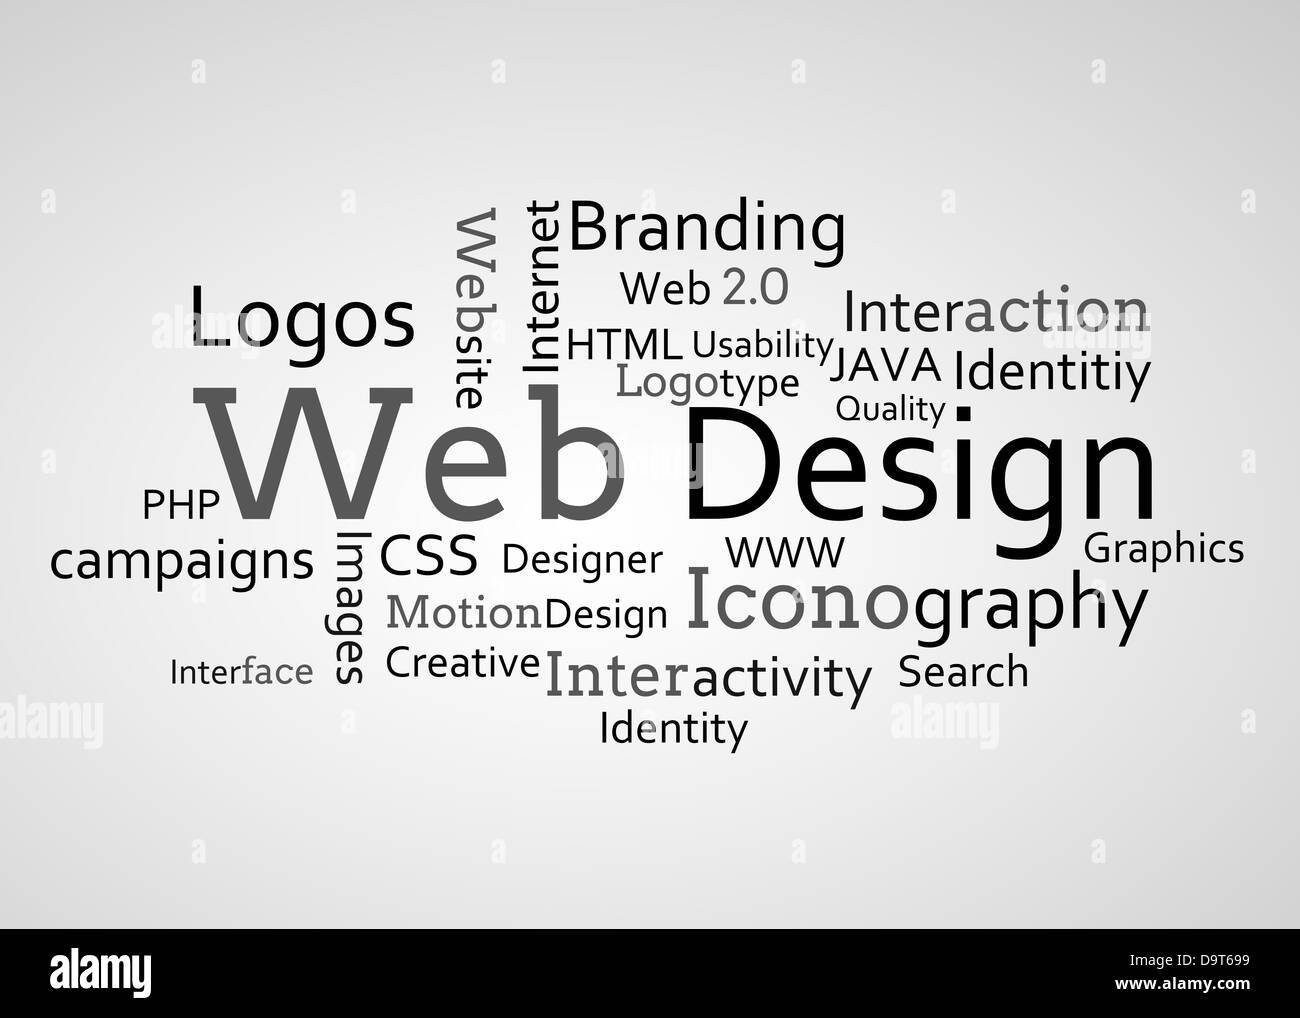 Group of web design terms Stock Photo